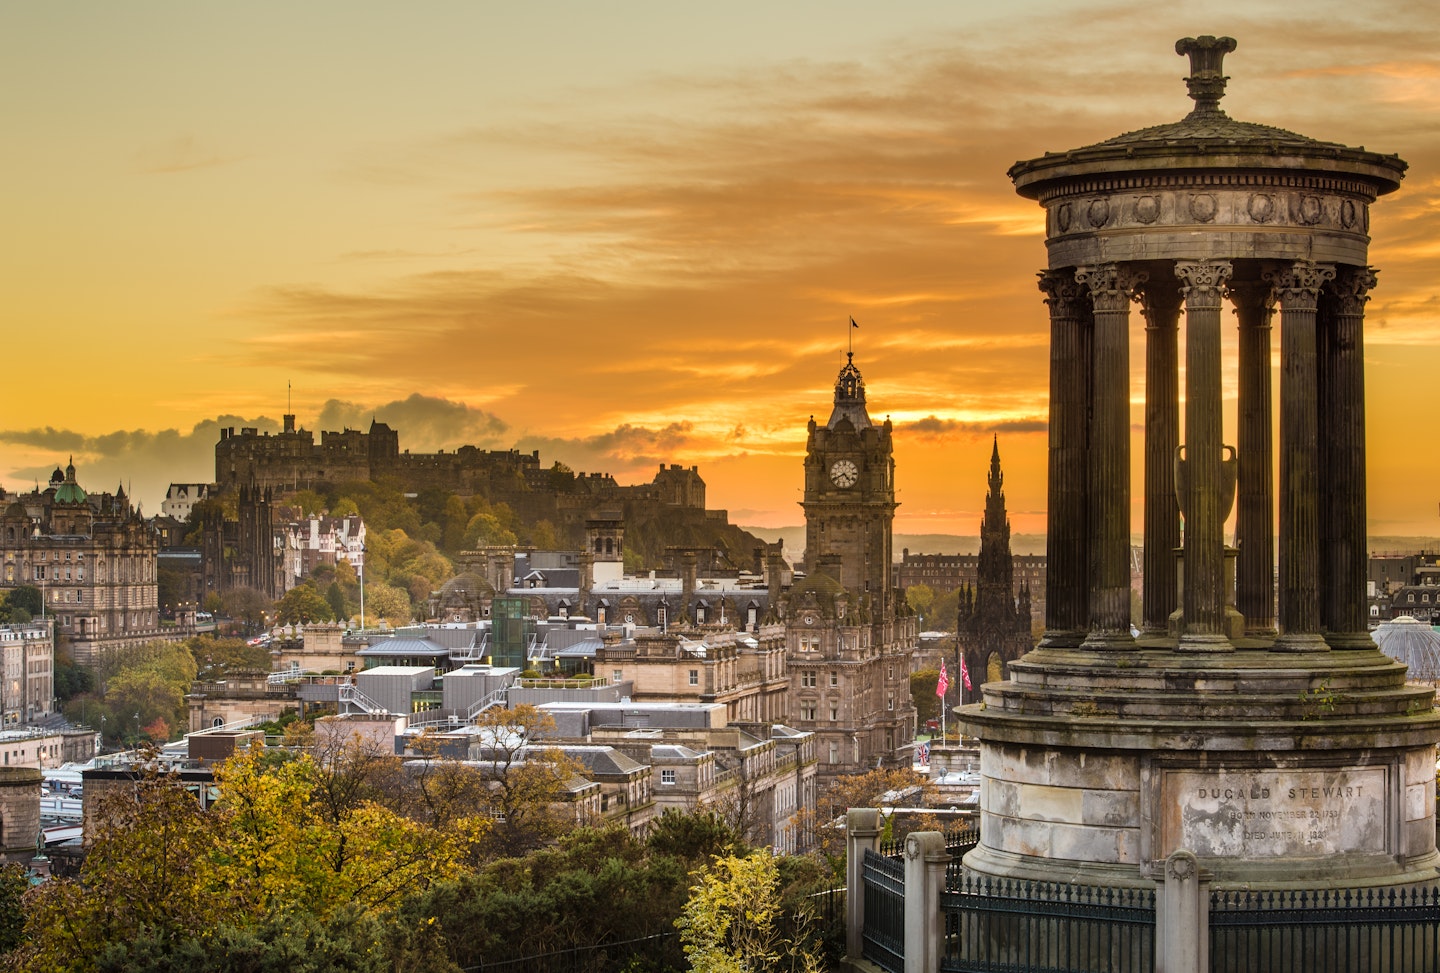 Edinburgh is a brilliant city to visit during the Fringe